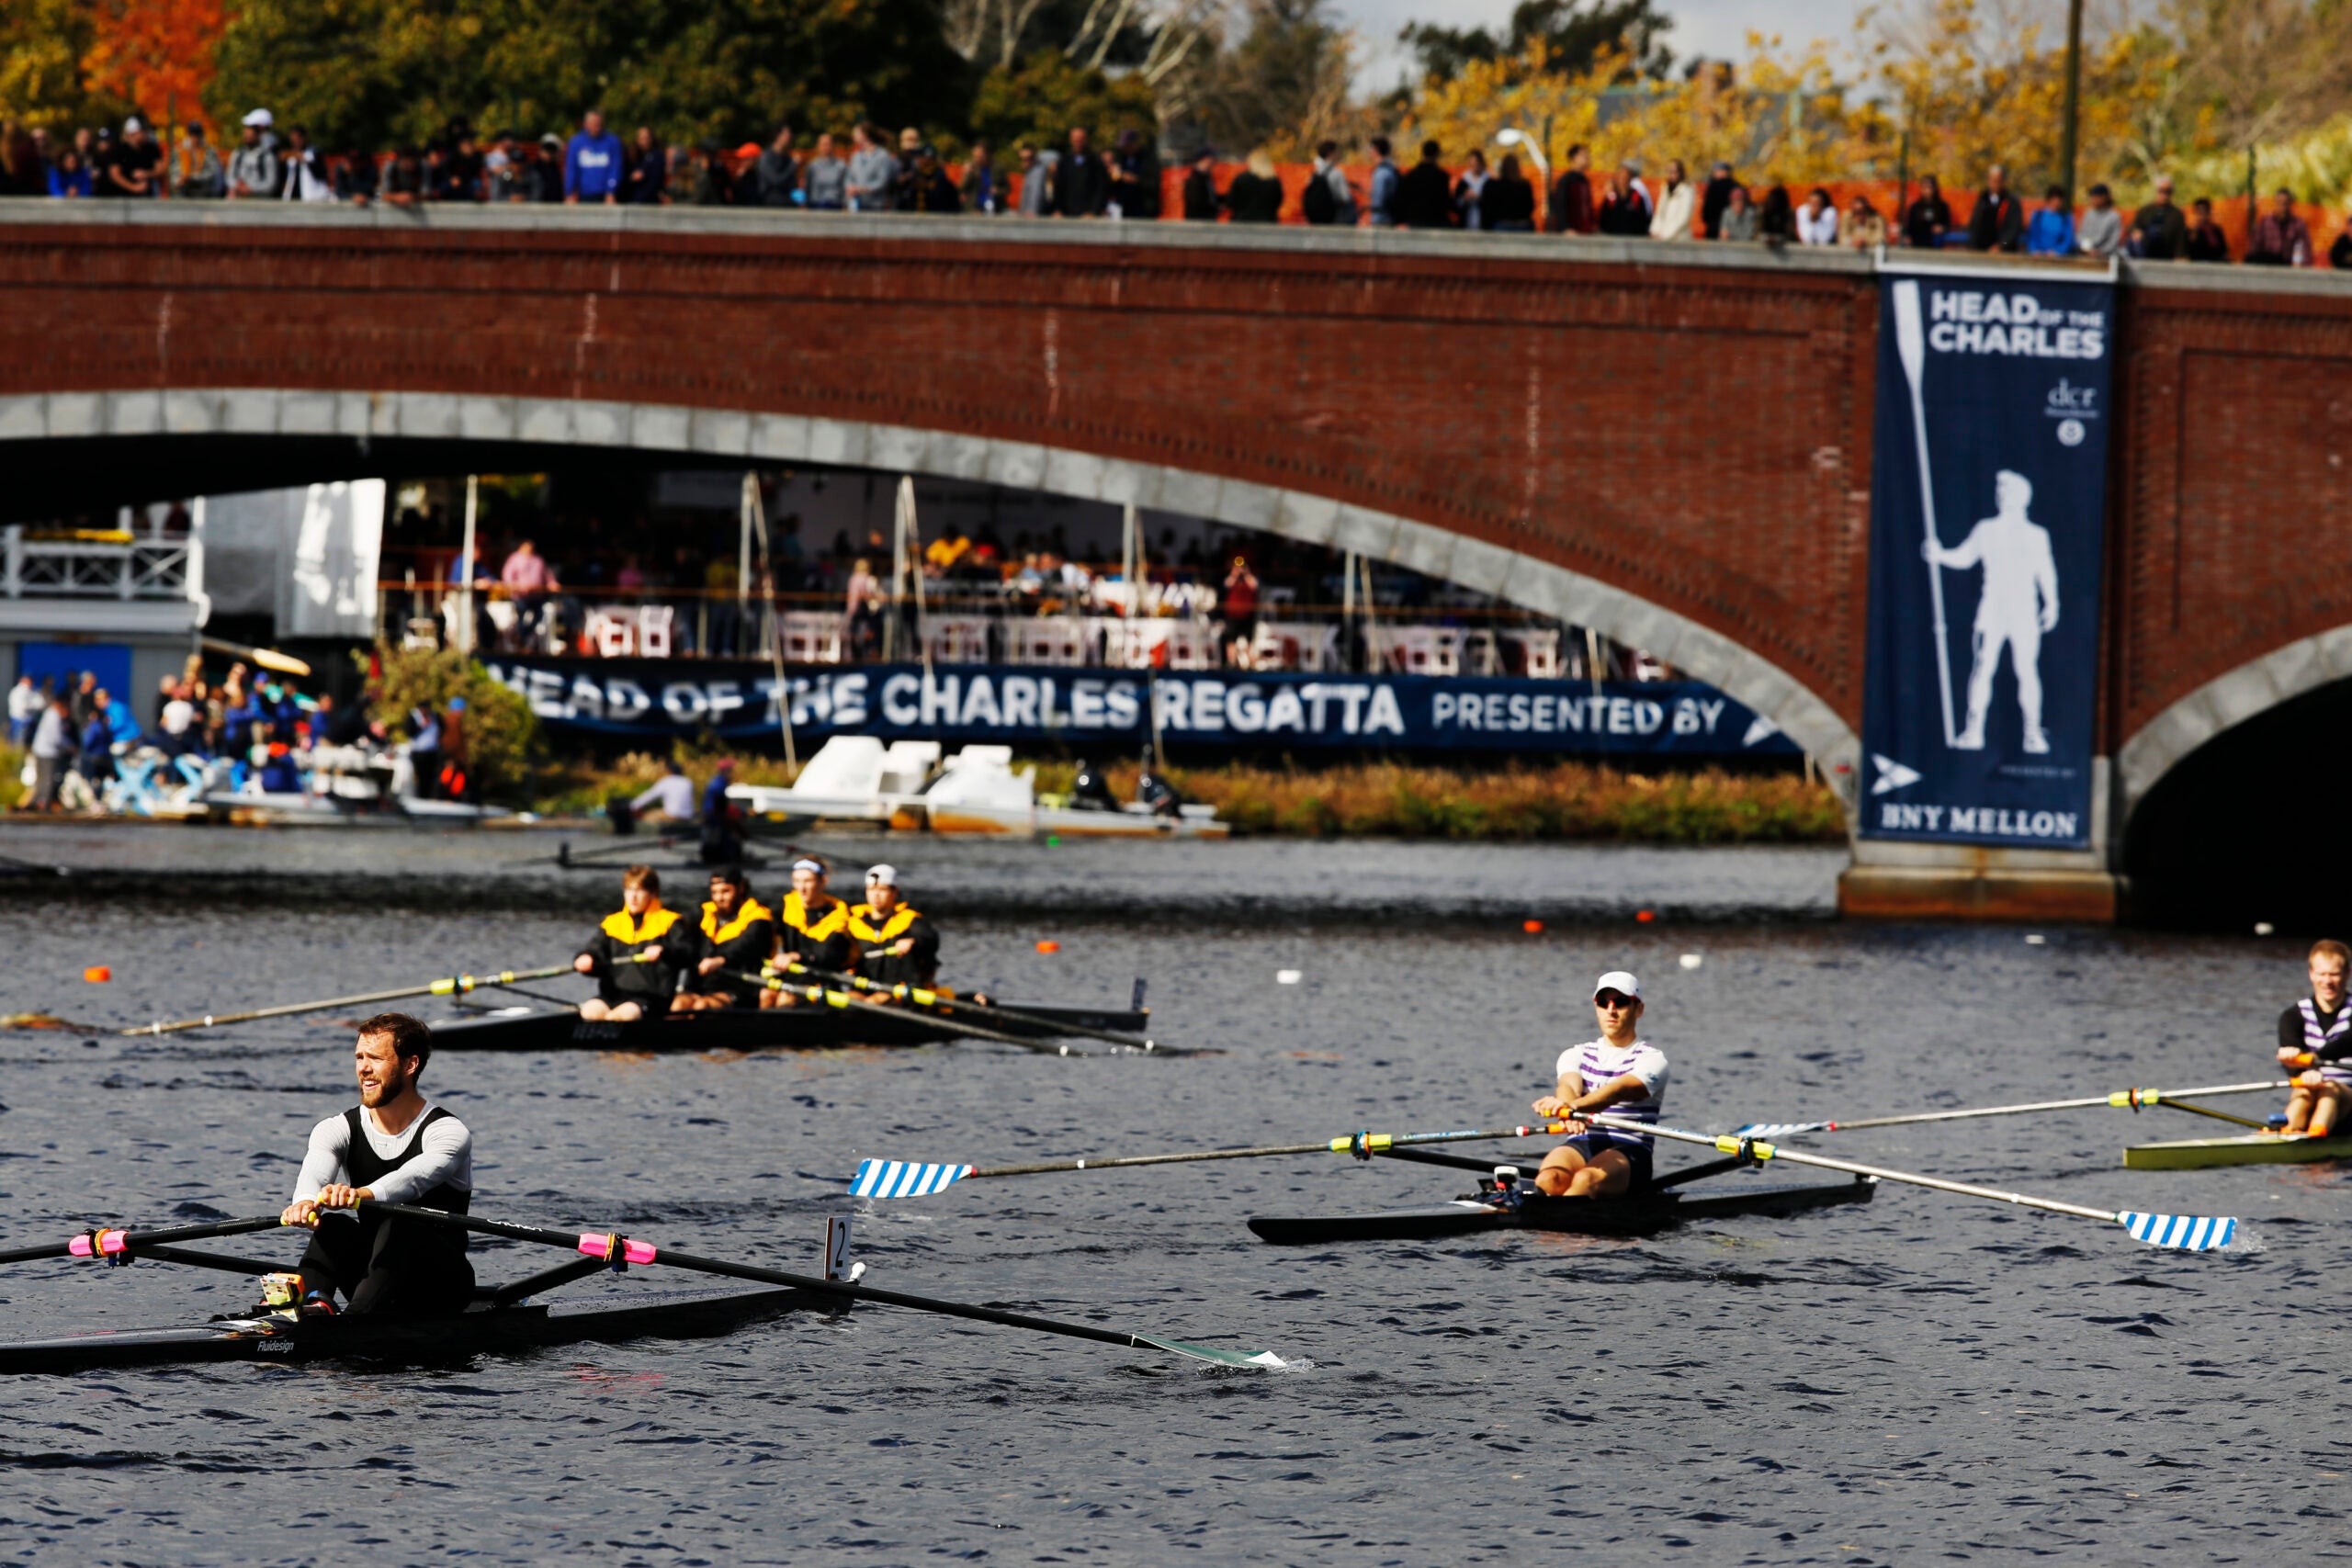 Watch Cruise Head of the Charles Regatta course in 60 seconds